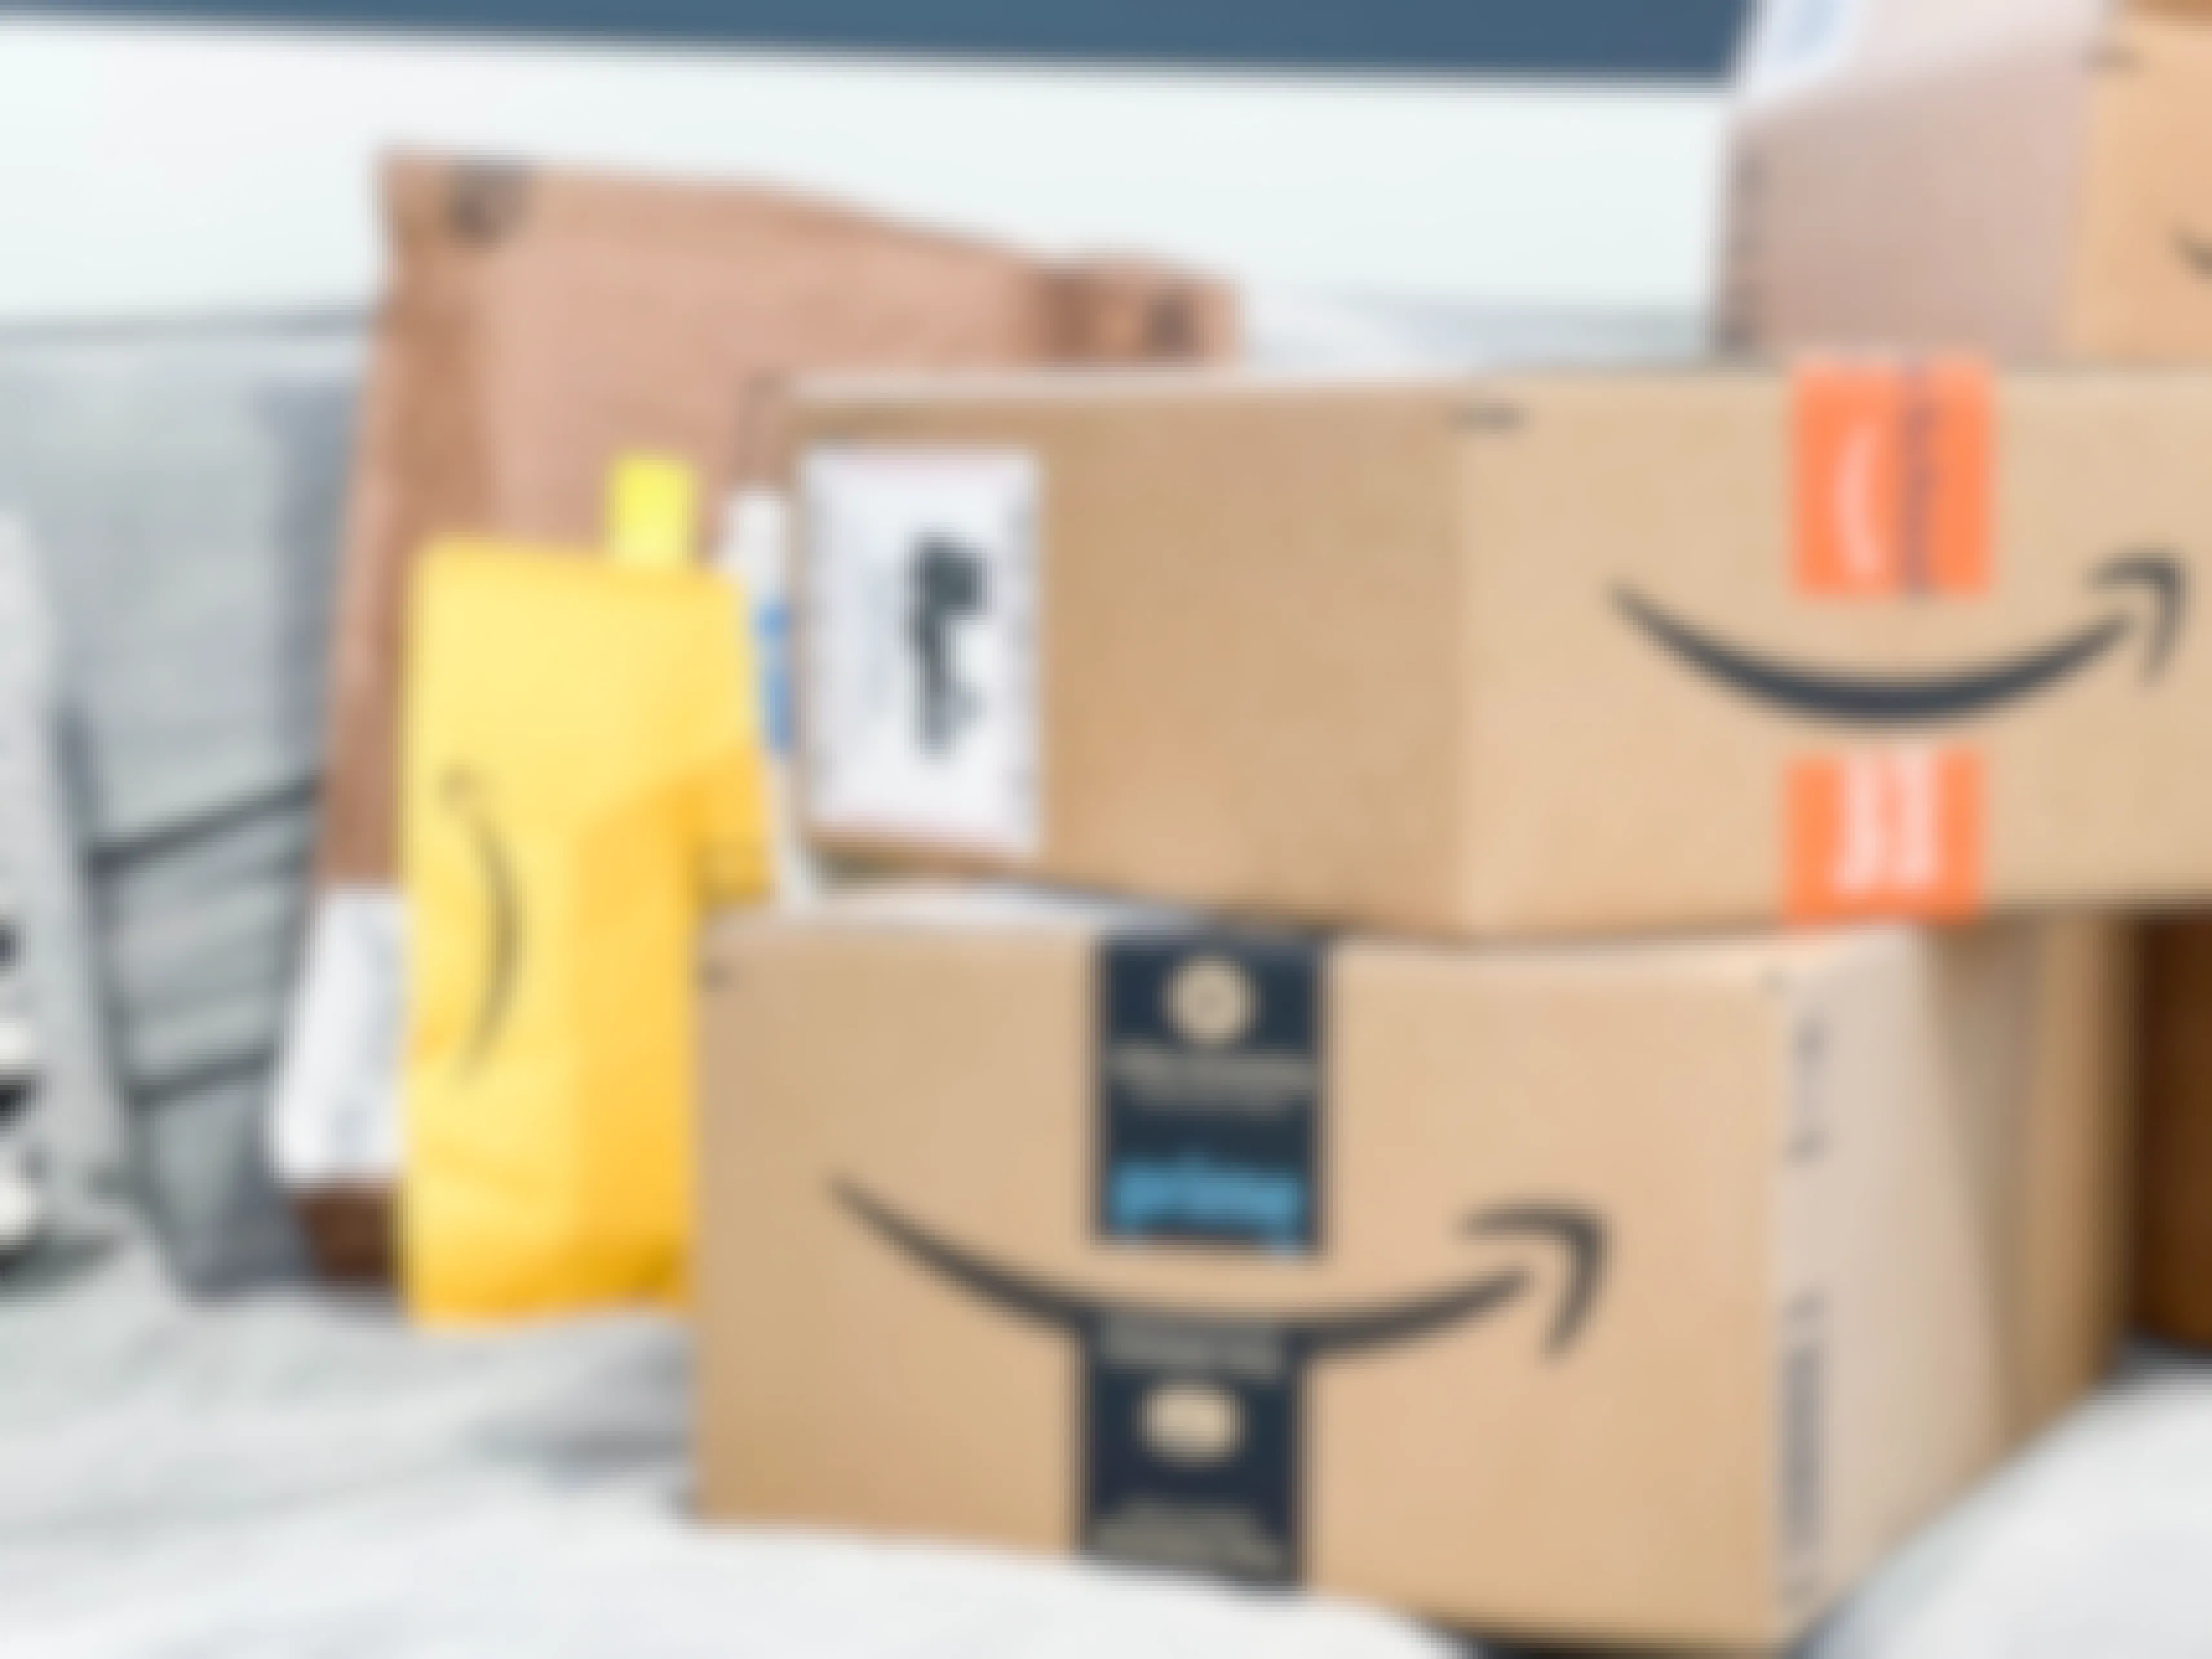 Prime Day Deals Under $5 We're Looking Forward To